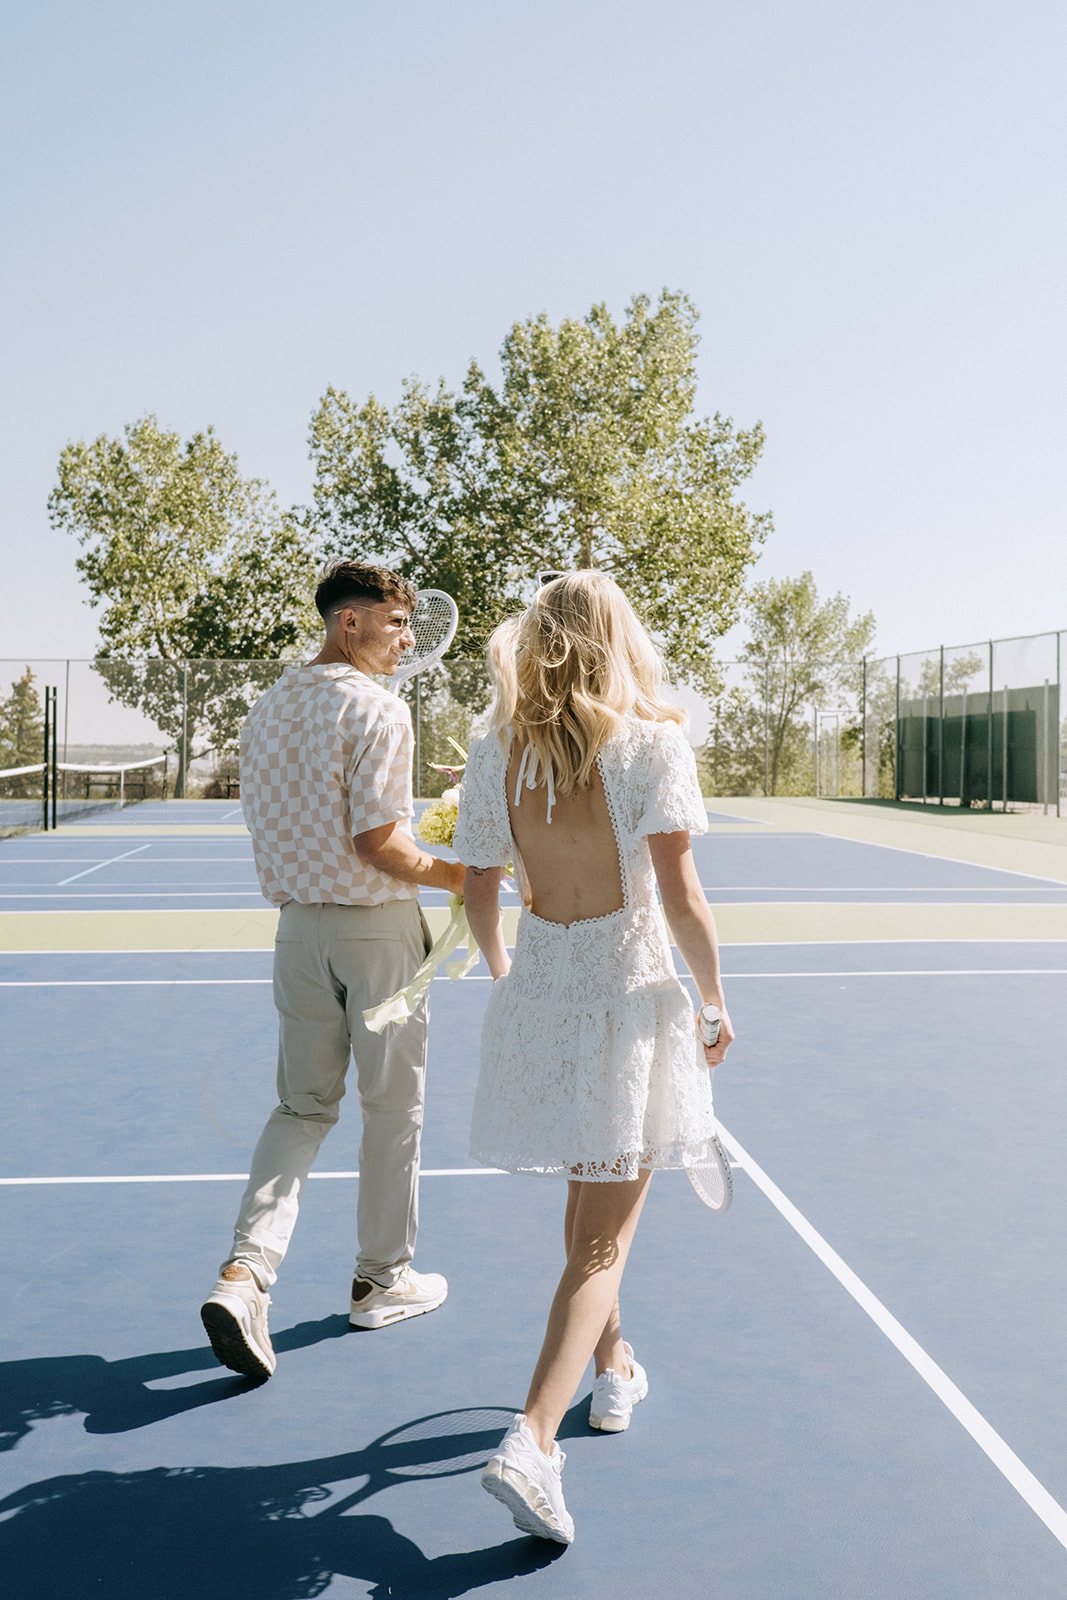 candid couple's portrait on tennis court during unique elopement, open-back short lace wedding dress by Asos with white bridal sneakers, casual wedding attire: alternative and sporty wedding ideas